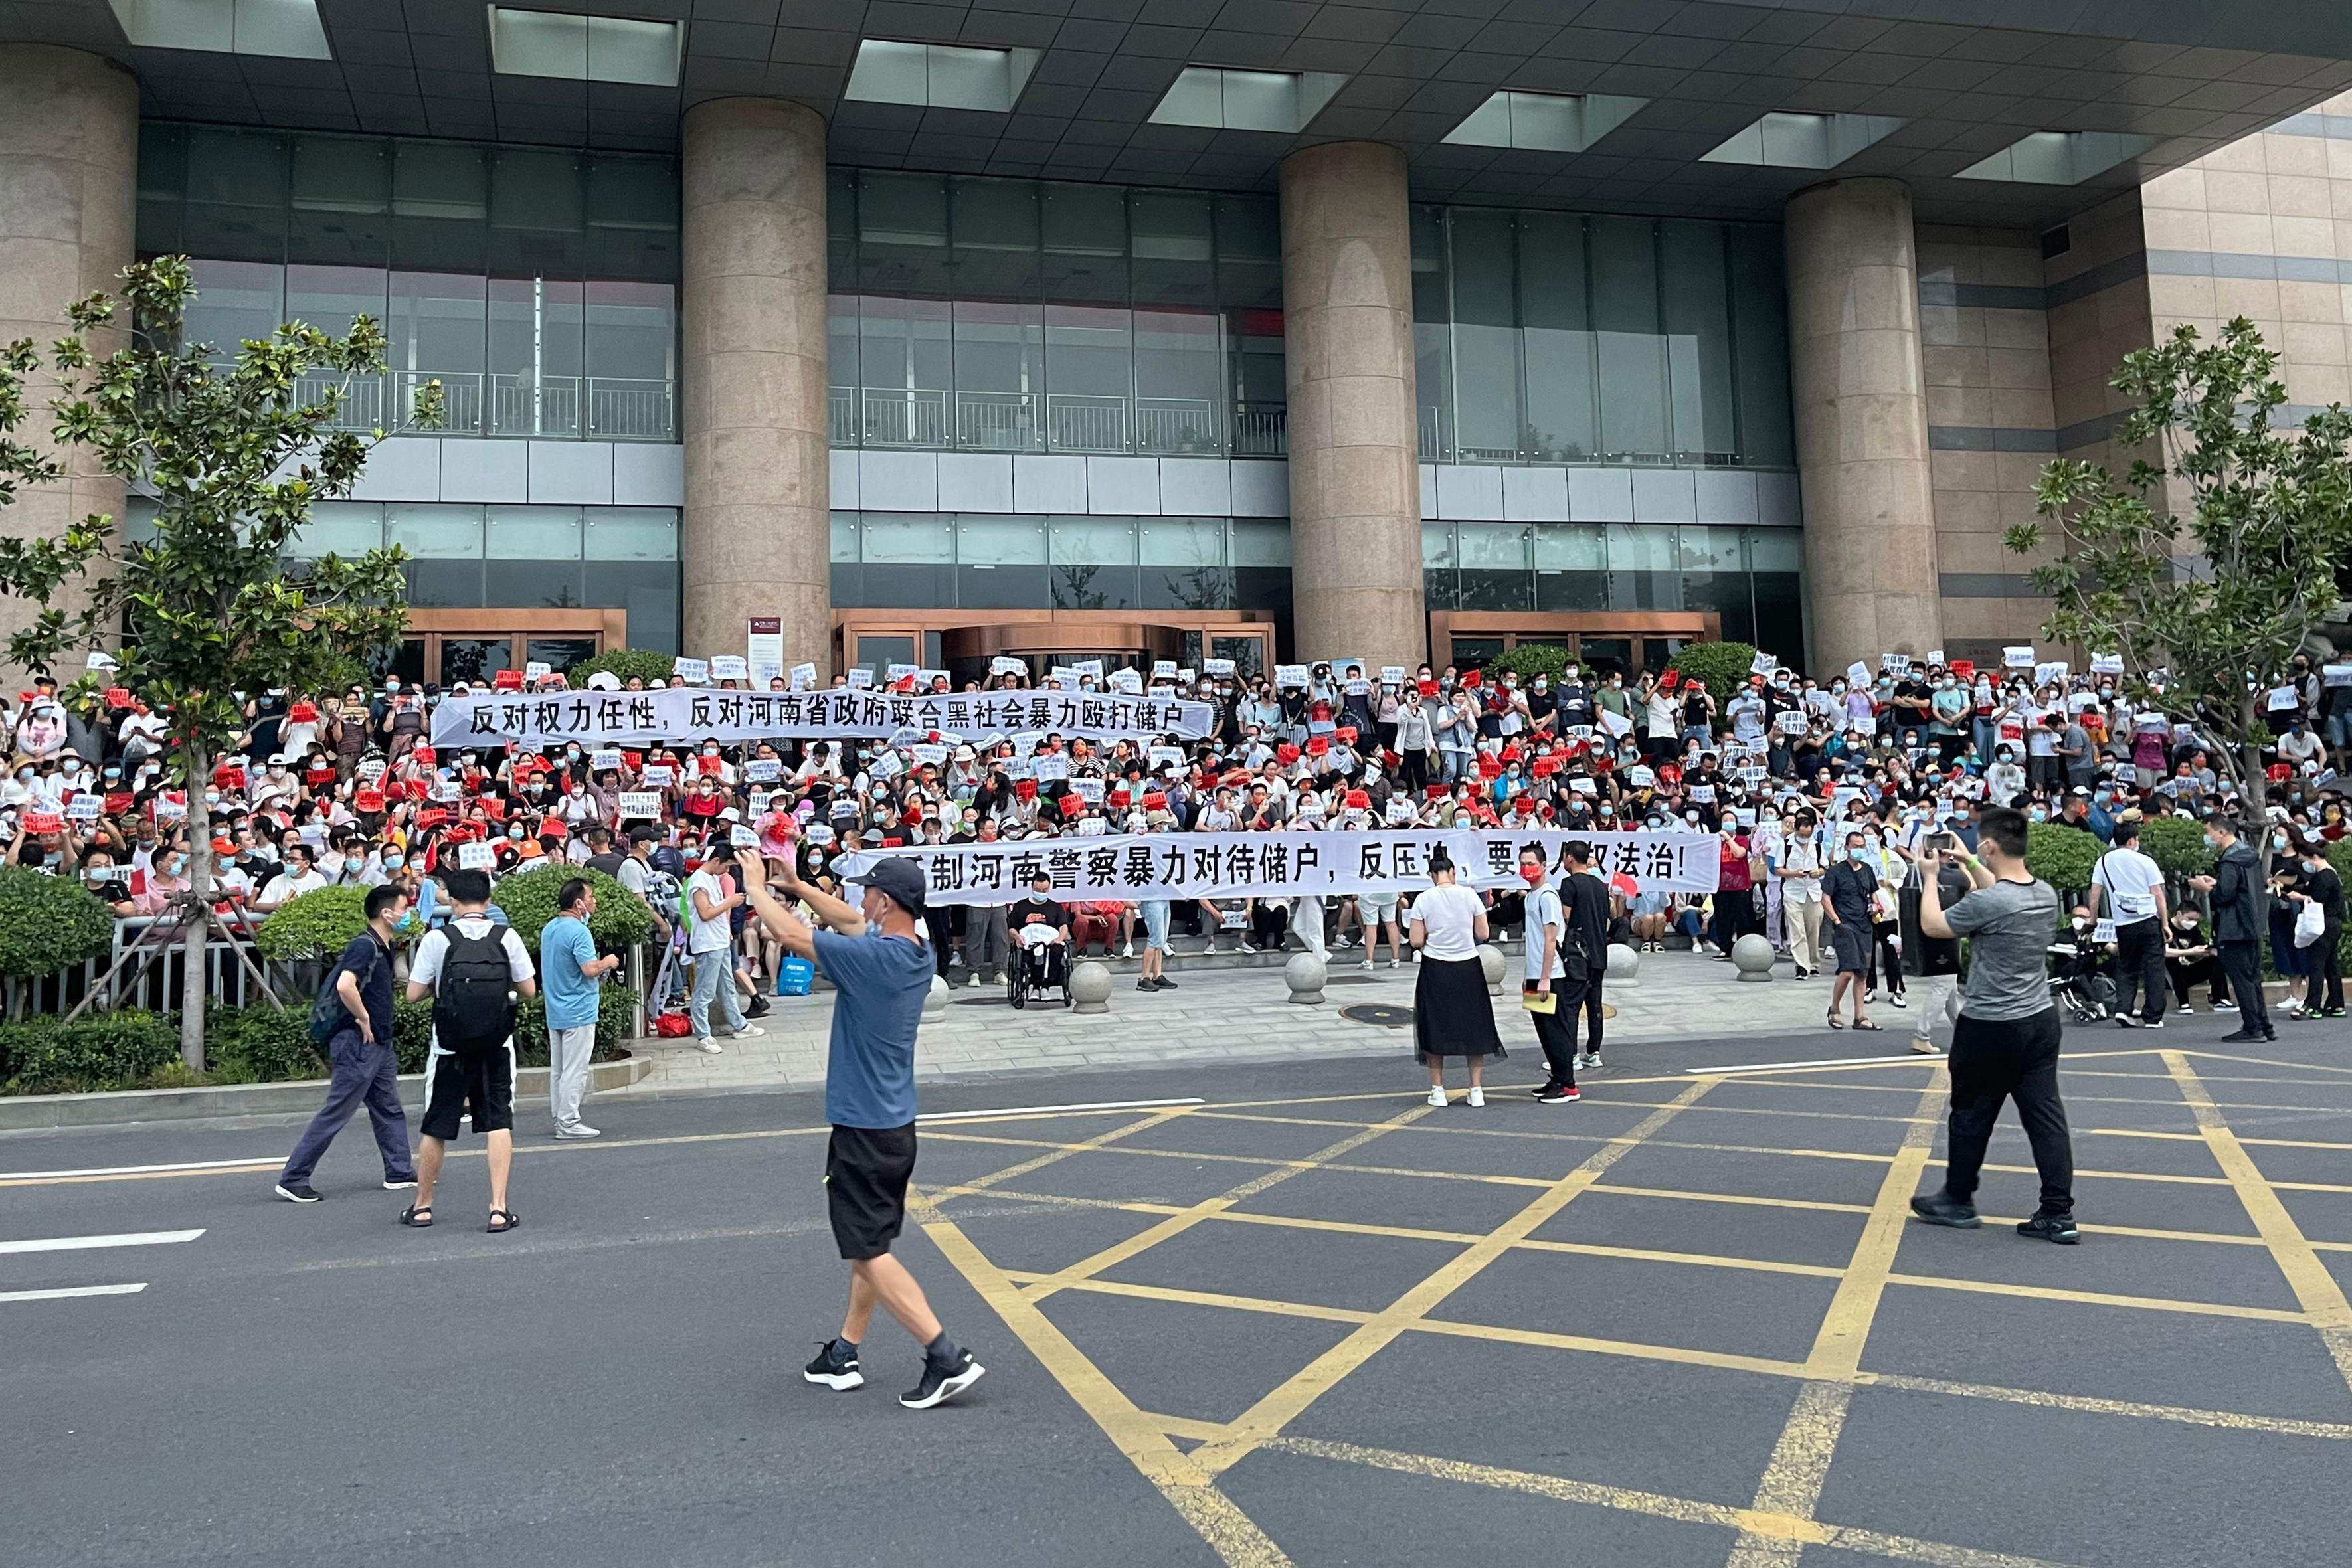 People protest in front of a branch of the People’s Bank of China in Zhengzhou, Henan province, on July 10. Hundreds marched in protest against alleged corruption by local officials in a rare public demonstration. Photo: AFP